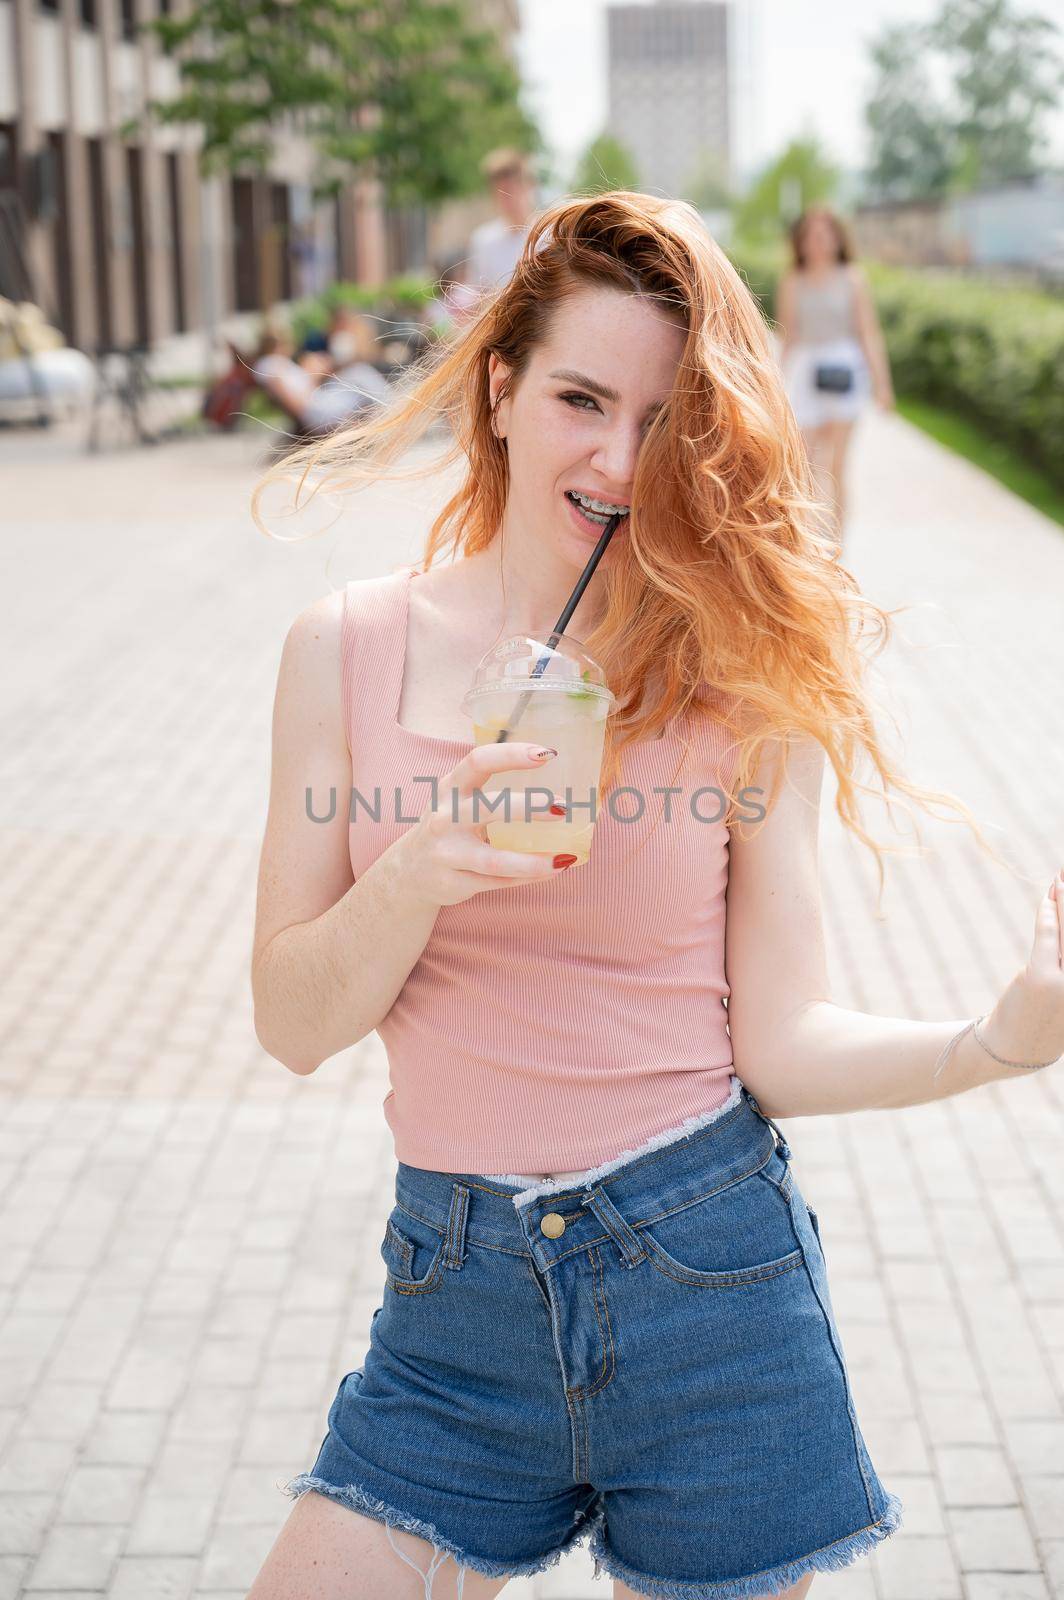 Young beautiful red-haired woman with braces drinks cooling cocktail outdoors in summer. Portrait of a smiling girl with freckles by mrwed54